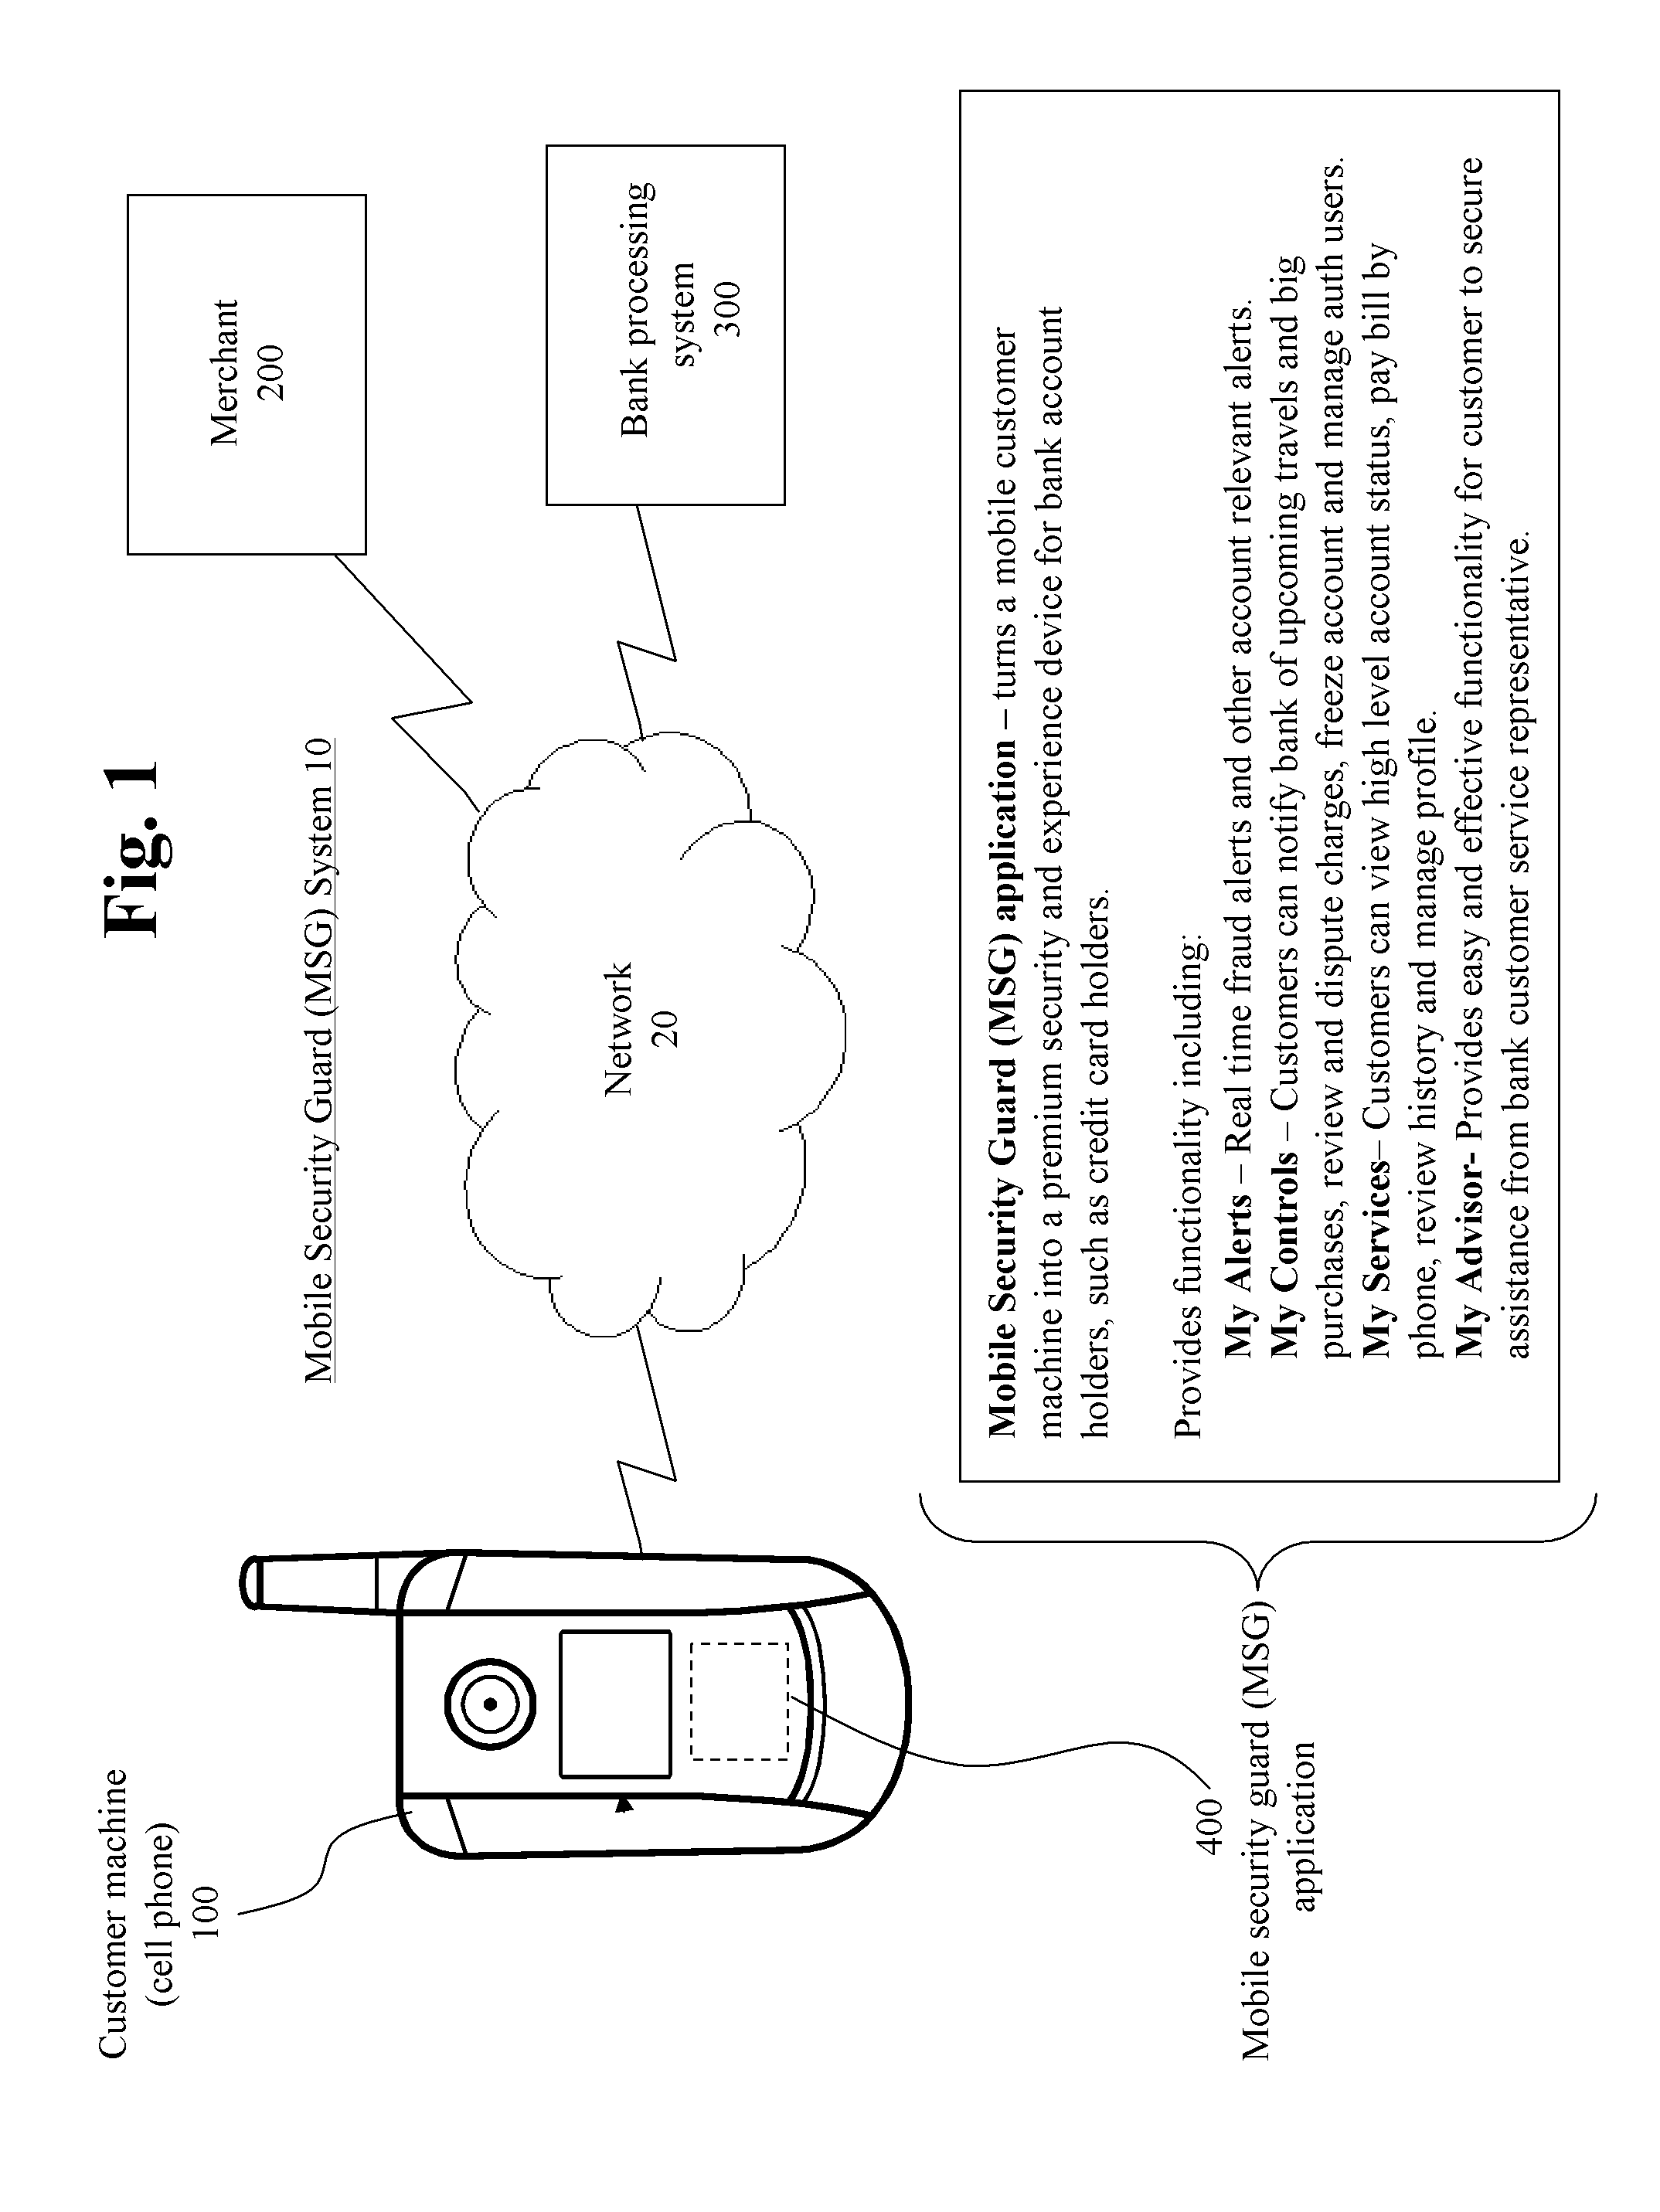 Systems and methods for providing a mobile financial platform